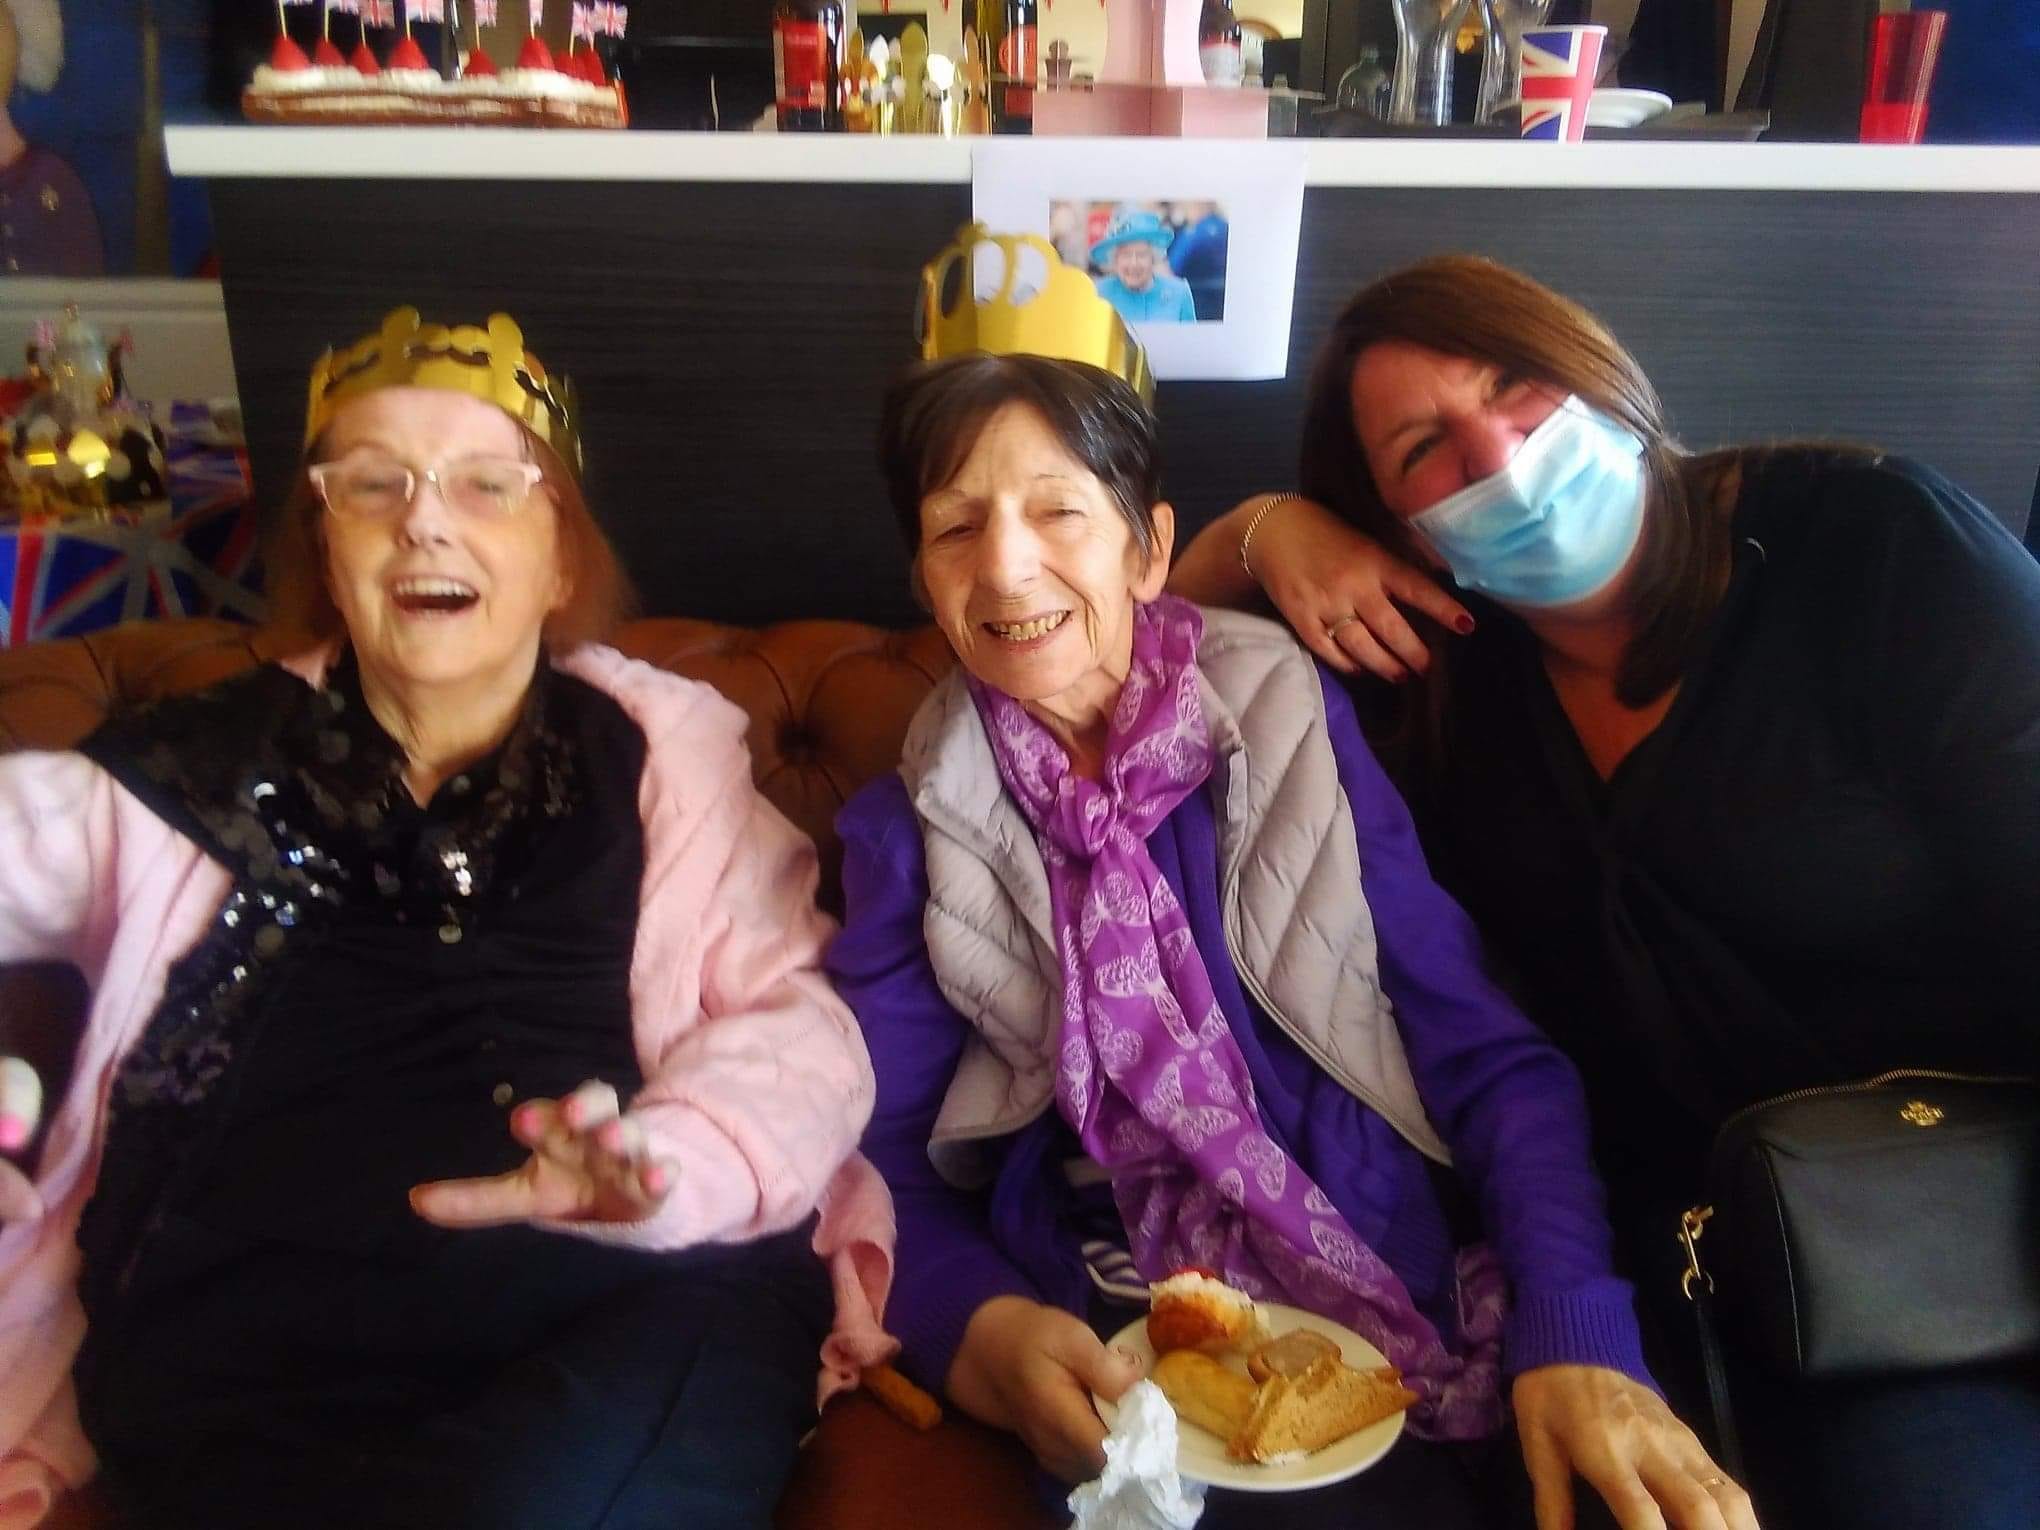 Residents Celebrating Jubilee with Loved Ones